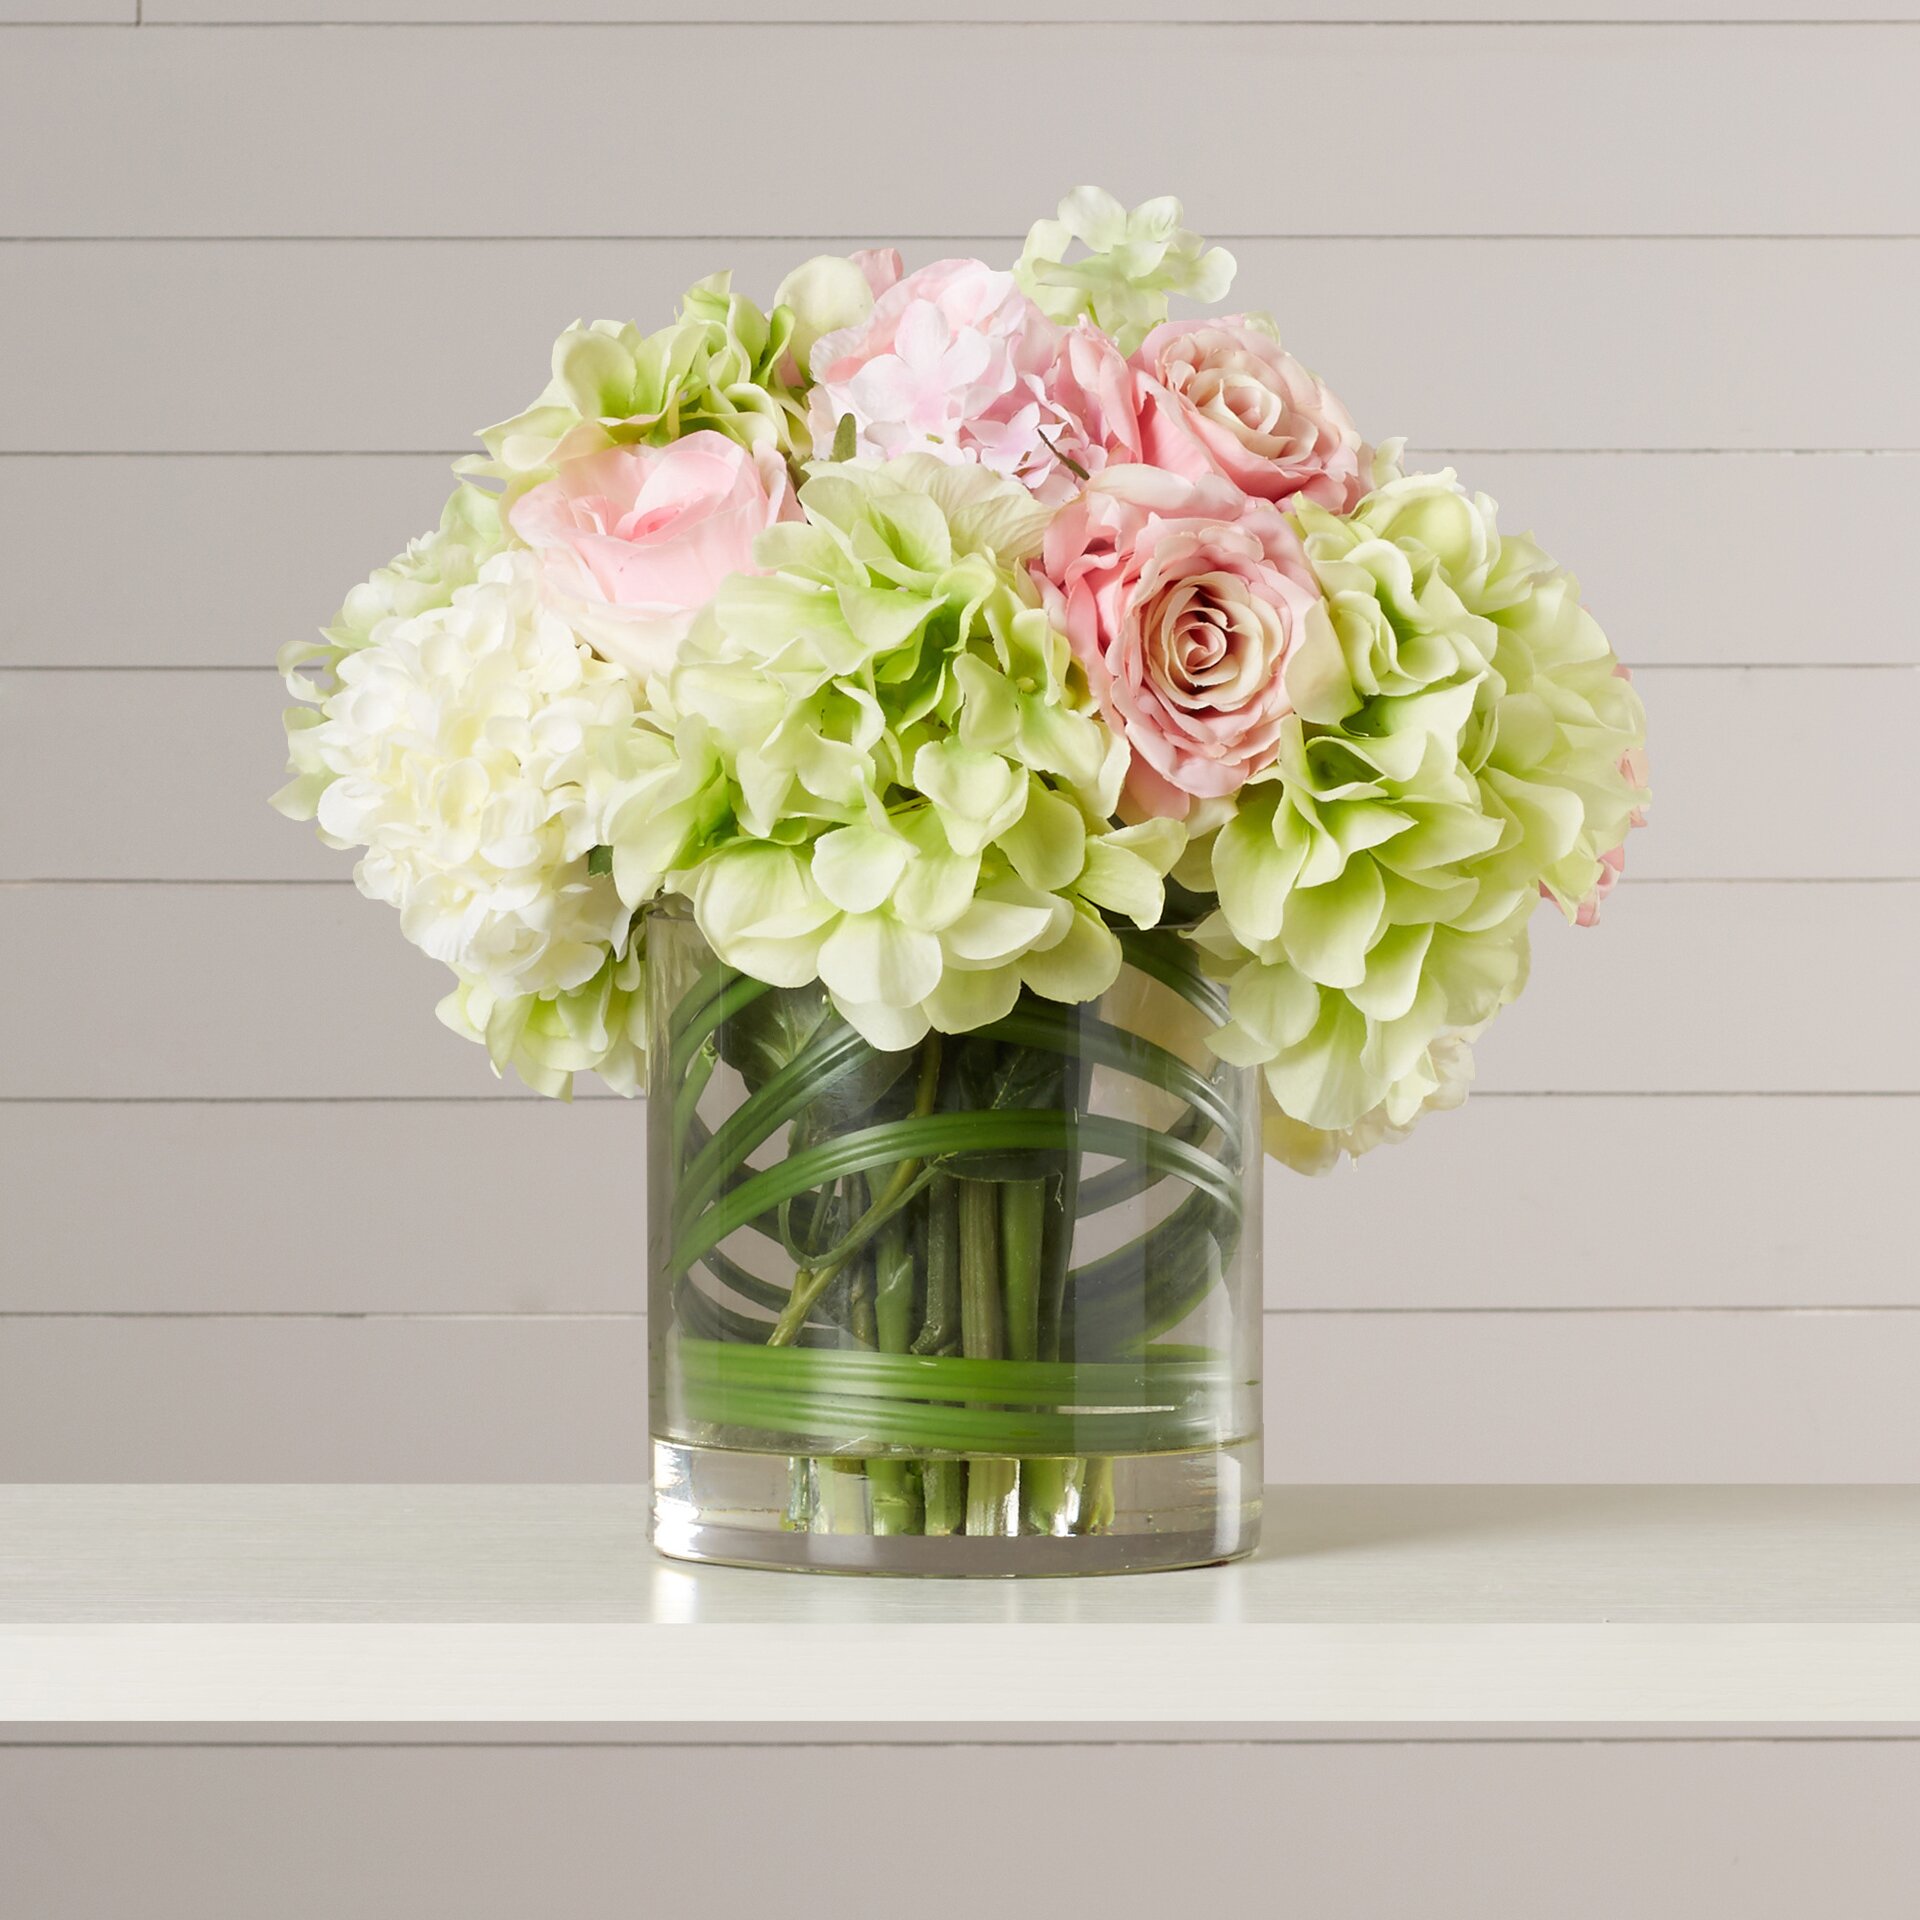 August Grove Spring Hydrangeas And Roses In Vase And Reviews Wayfair